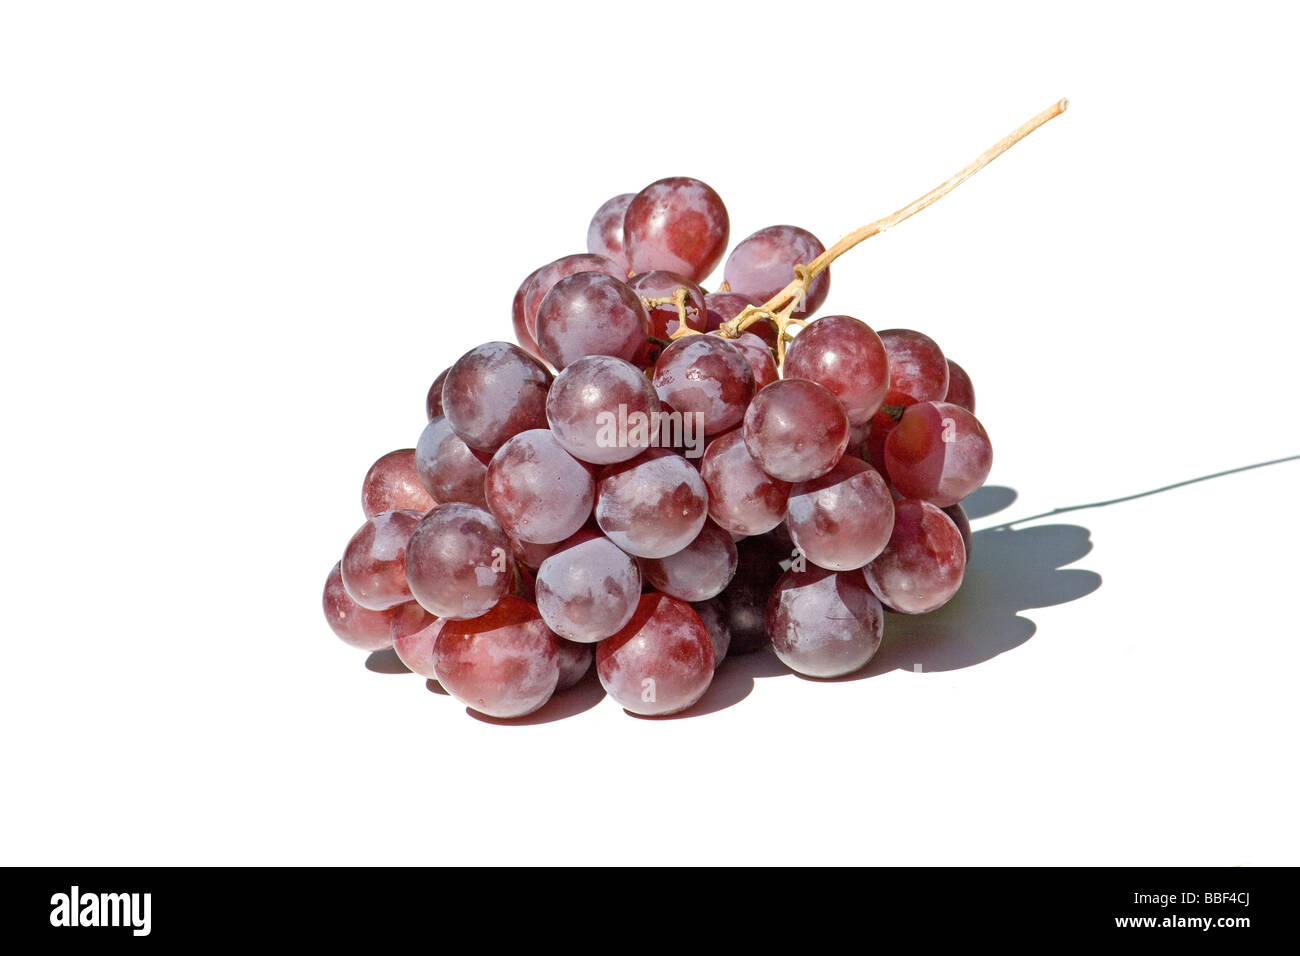 Cluster of red grapes Stock Photo